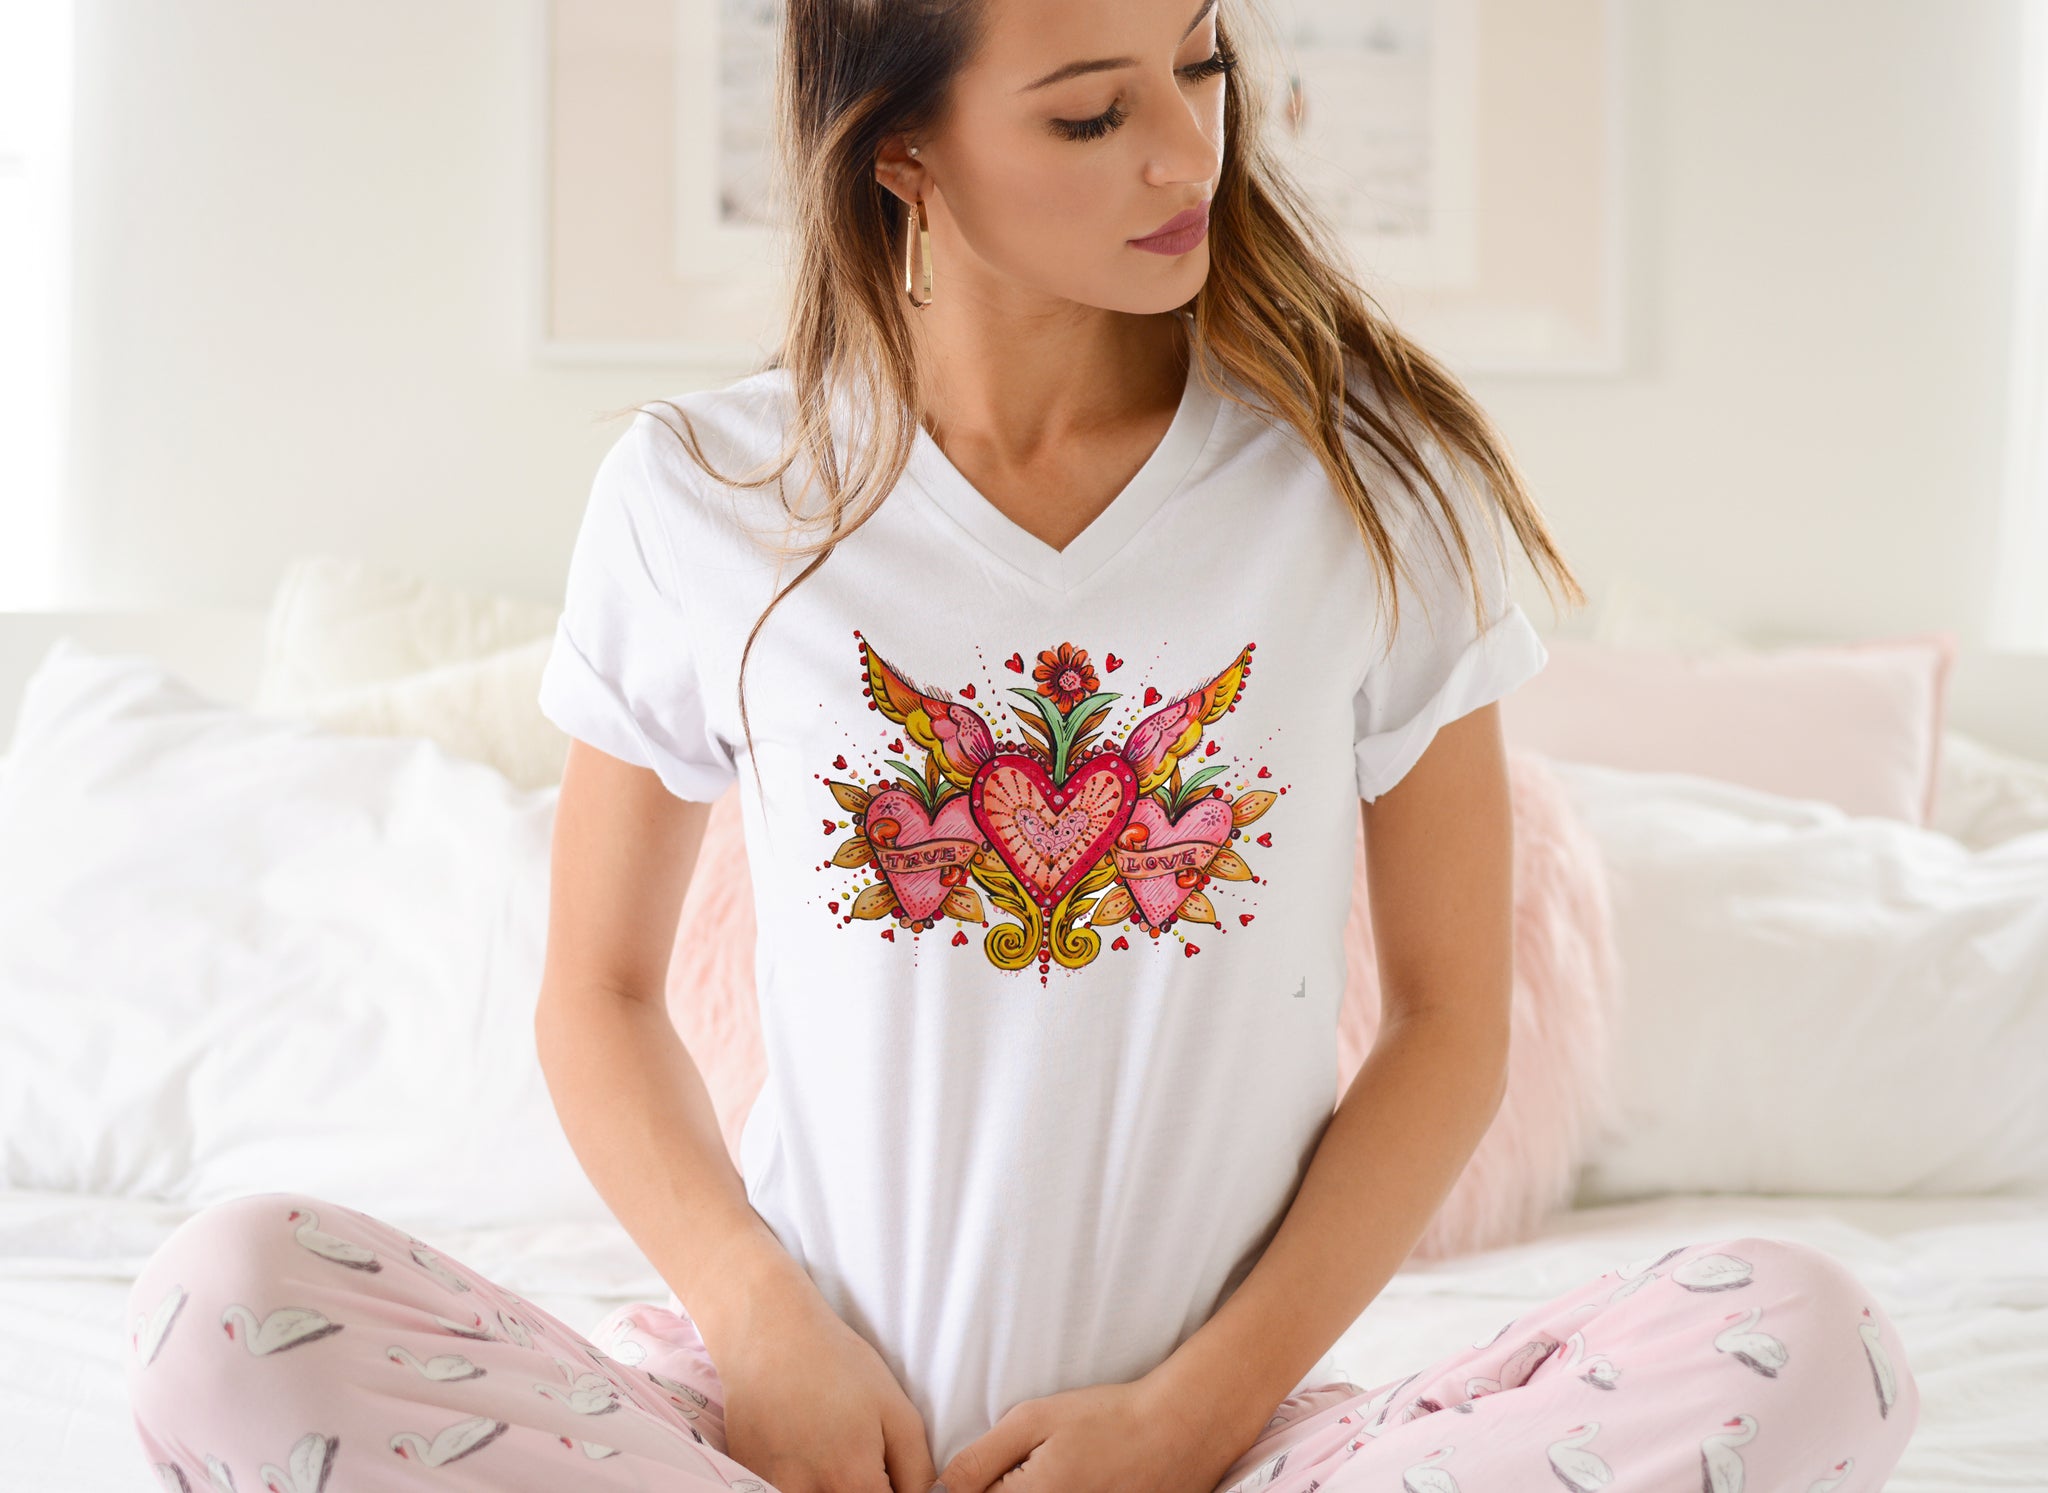 True Love Ladies T-Shirt (UK Sizes 8-40) - Artwork by the Very Talented Artist Sarah Neville - Made to Order